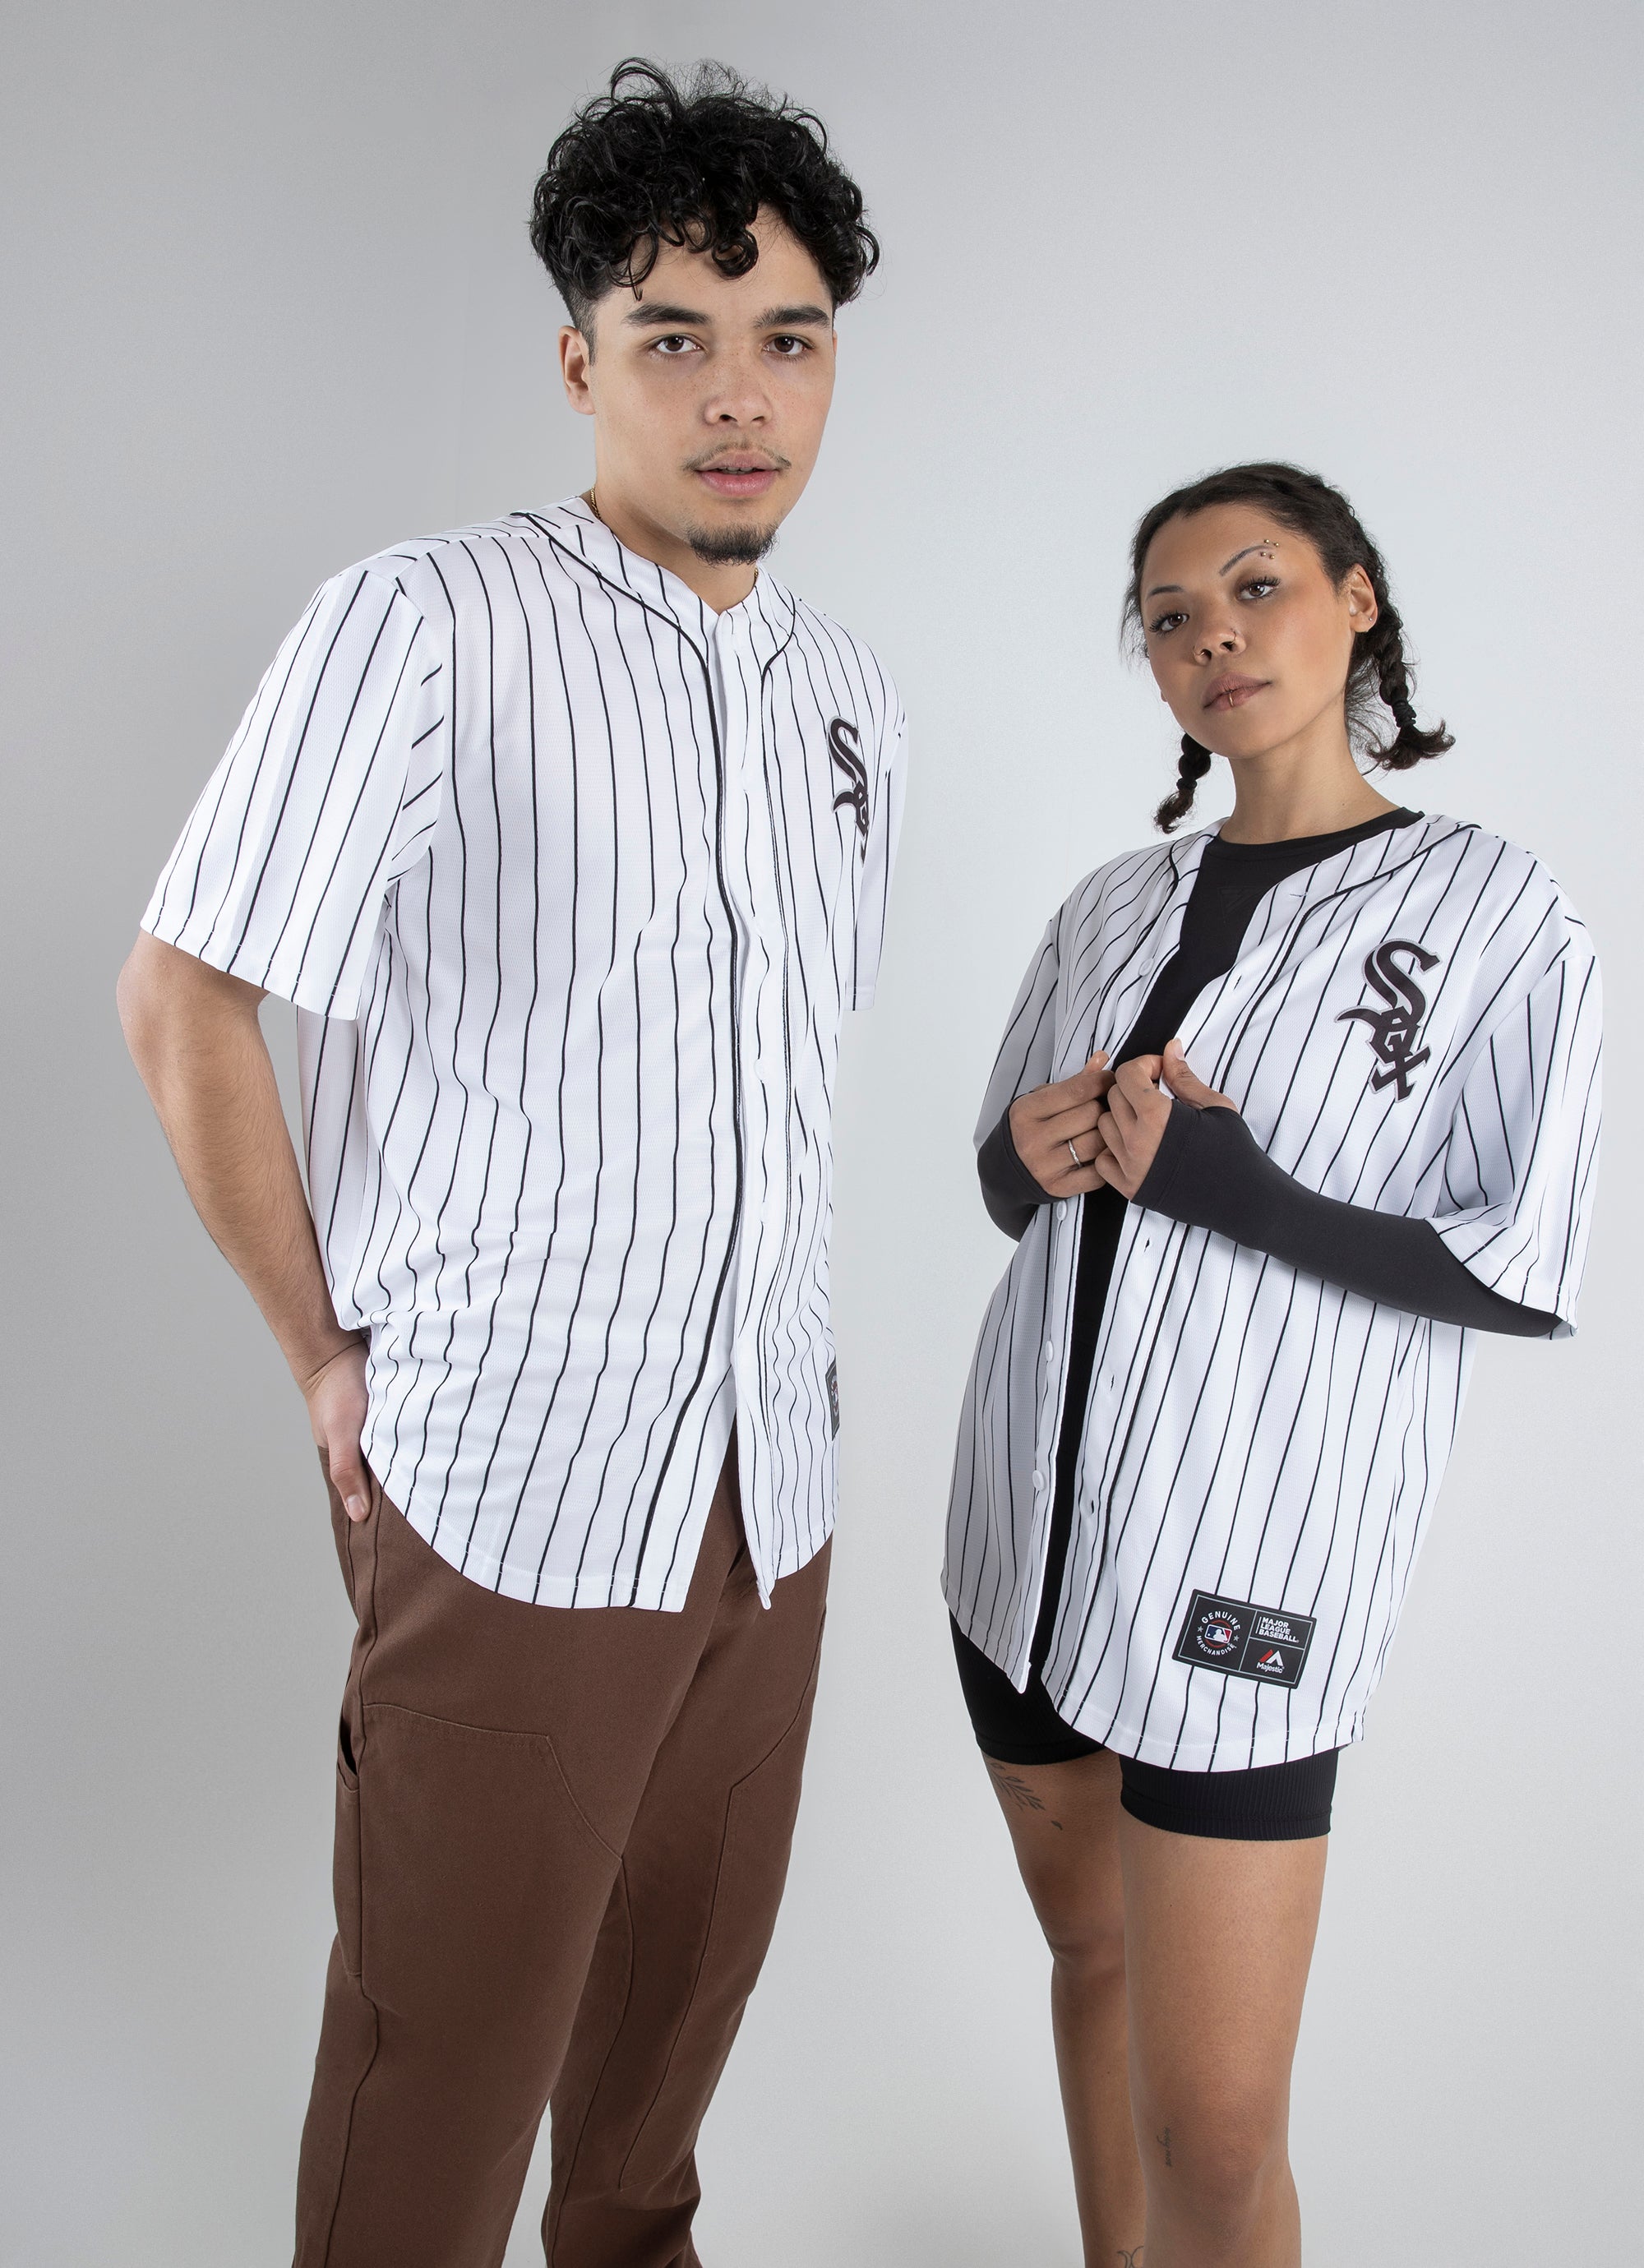 white sox jersey outfit